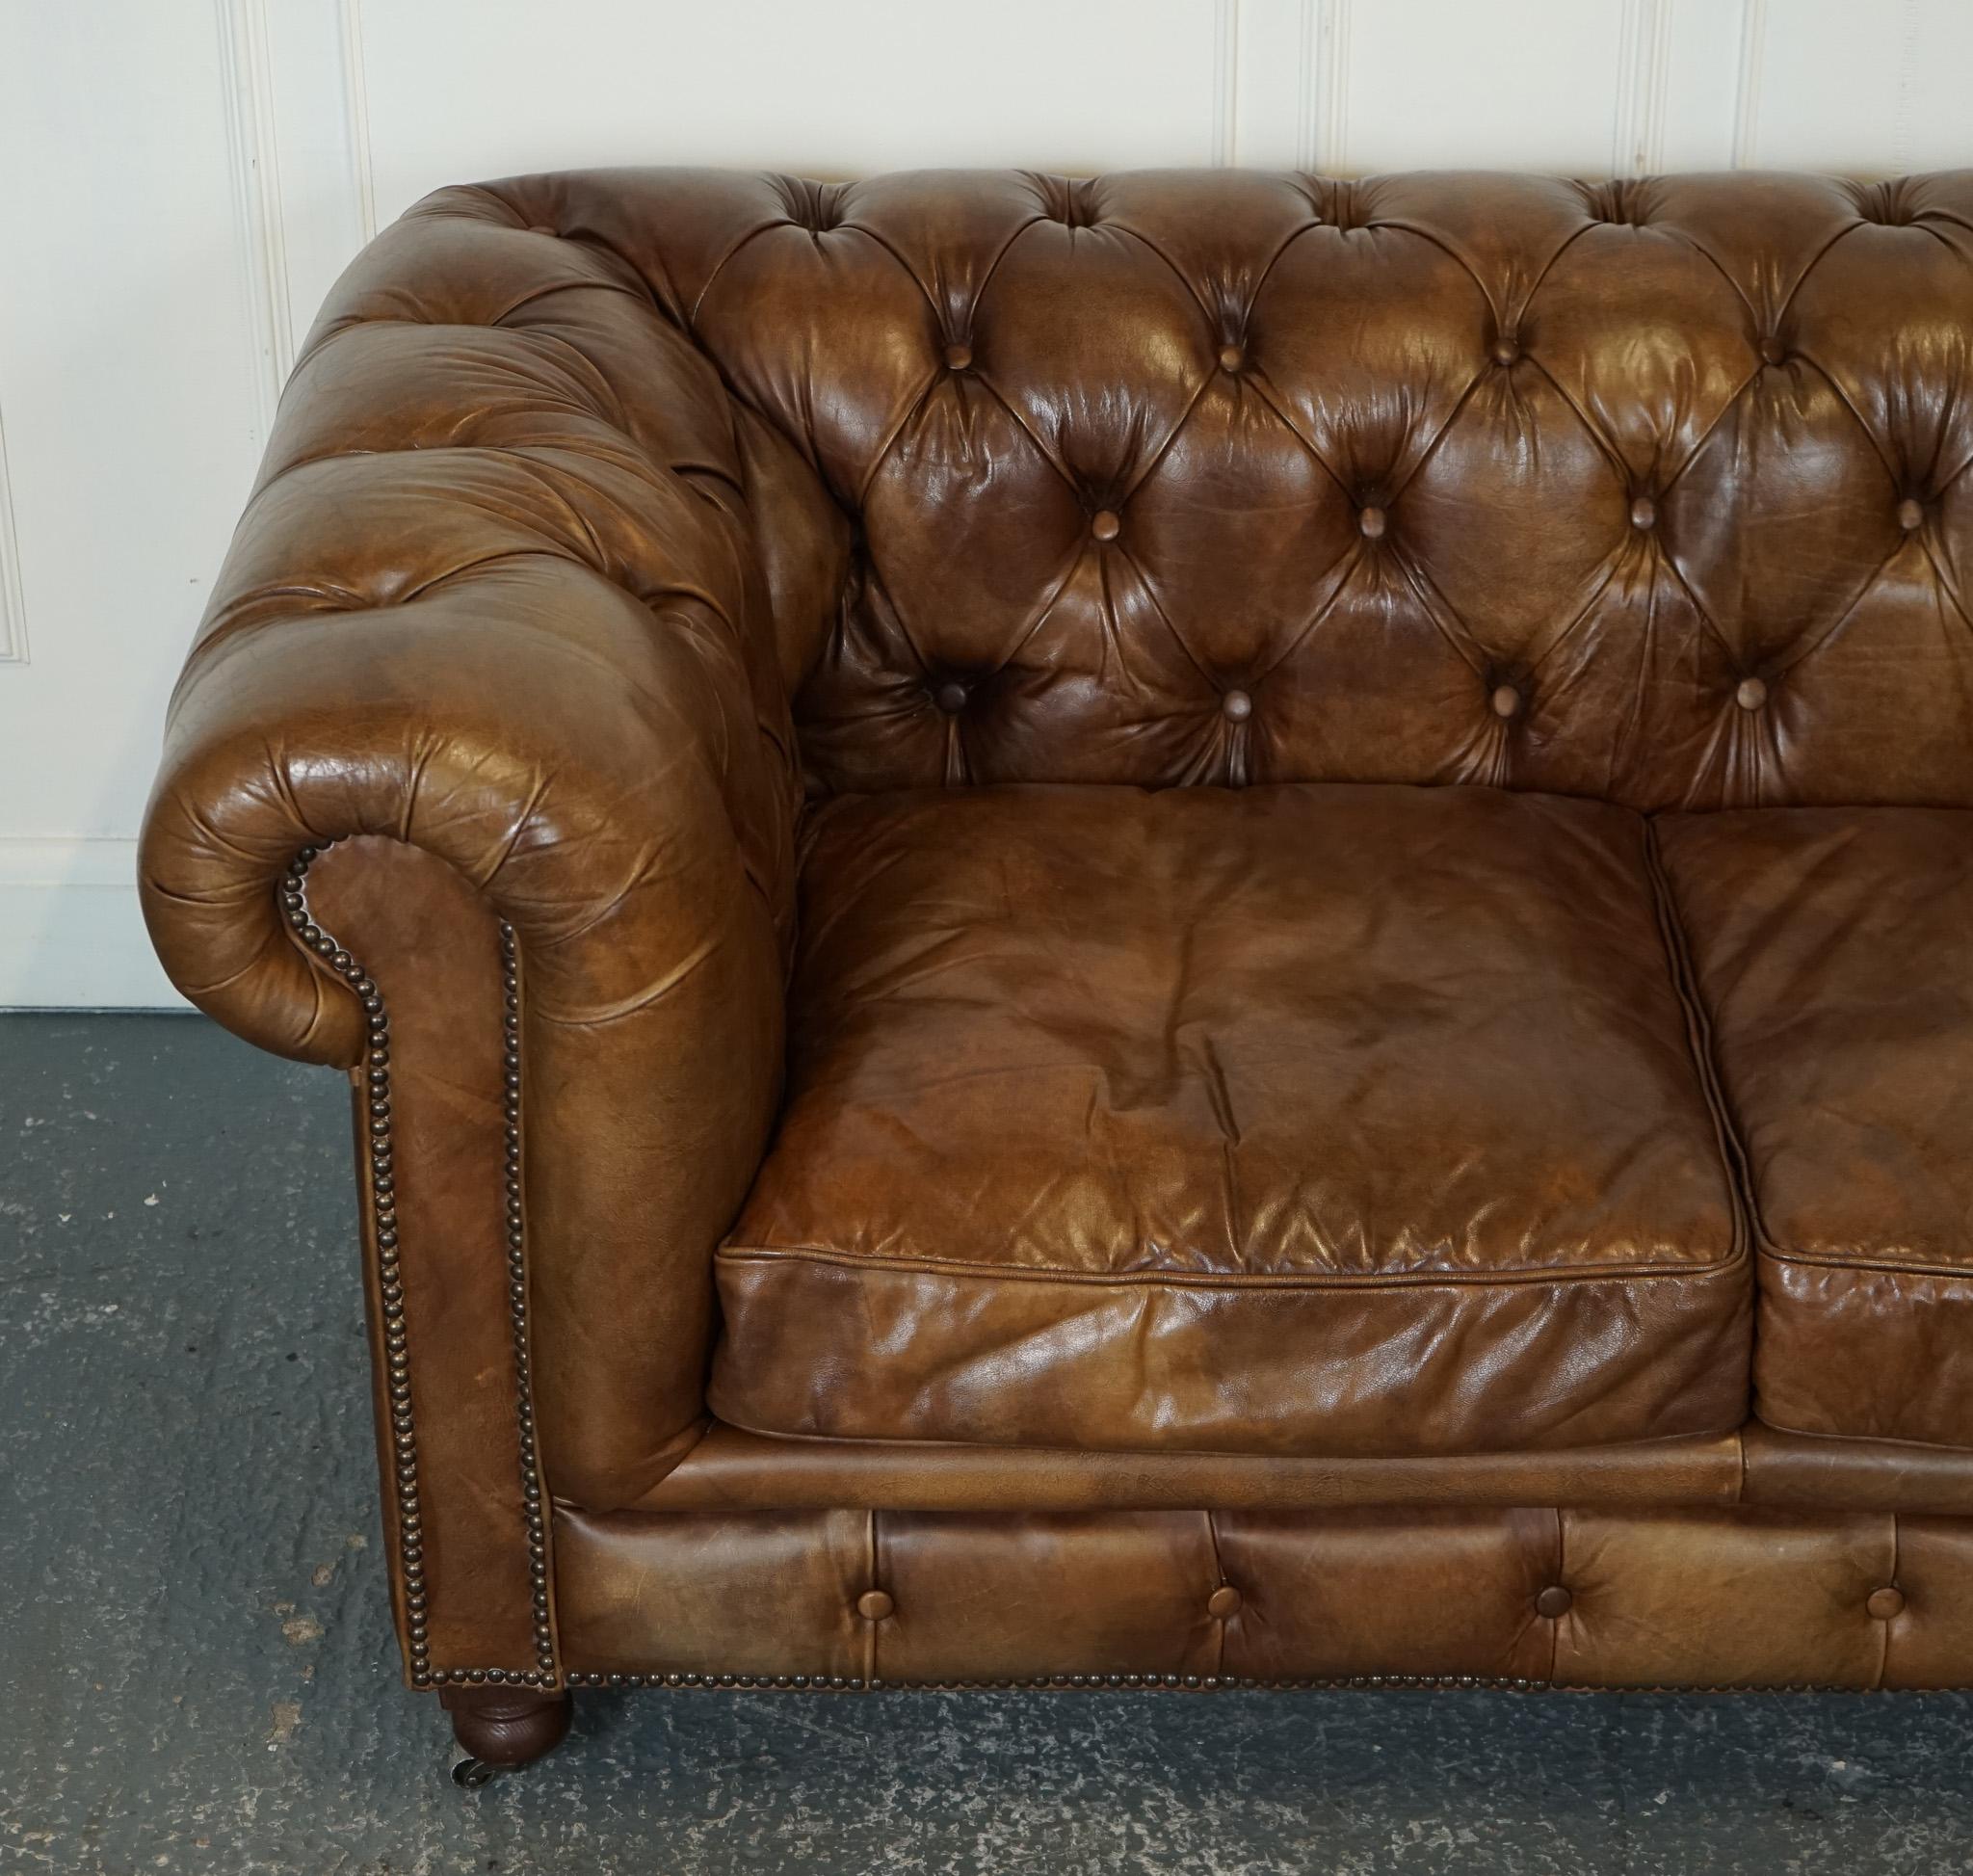 British GORGEOUS TIMOTHY OULTON CHESTERFIELD SOFA BY HALO HERiTAGE BROWN LEATHER J1 For Sale